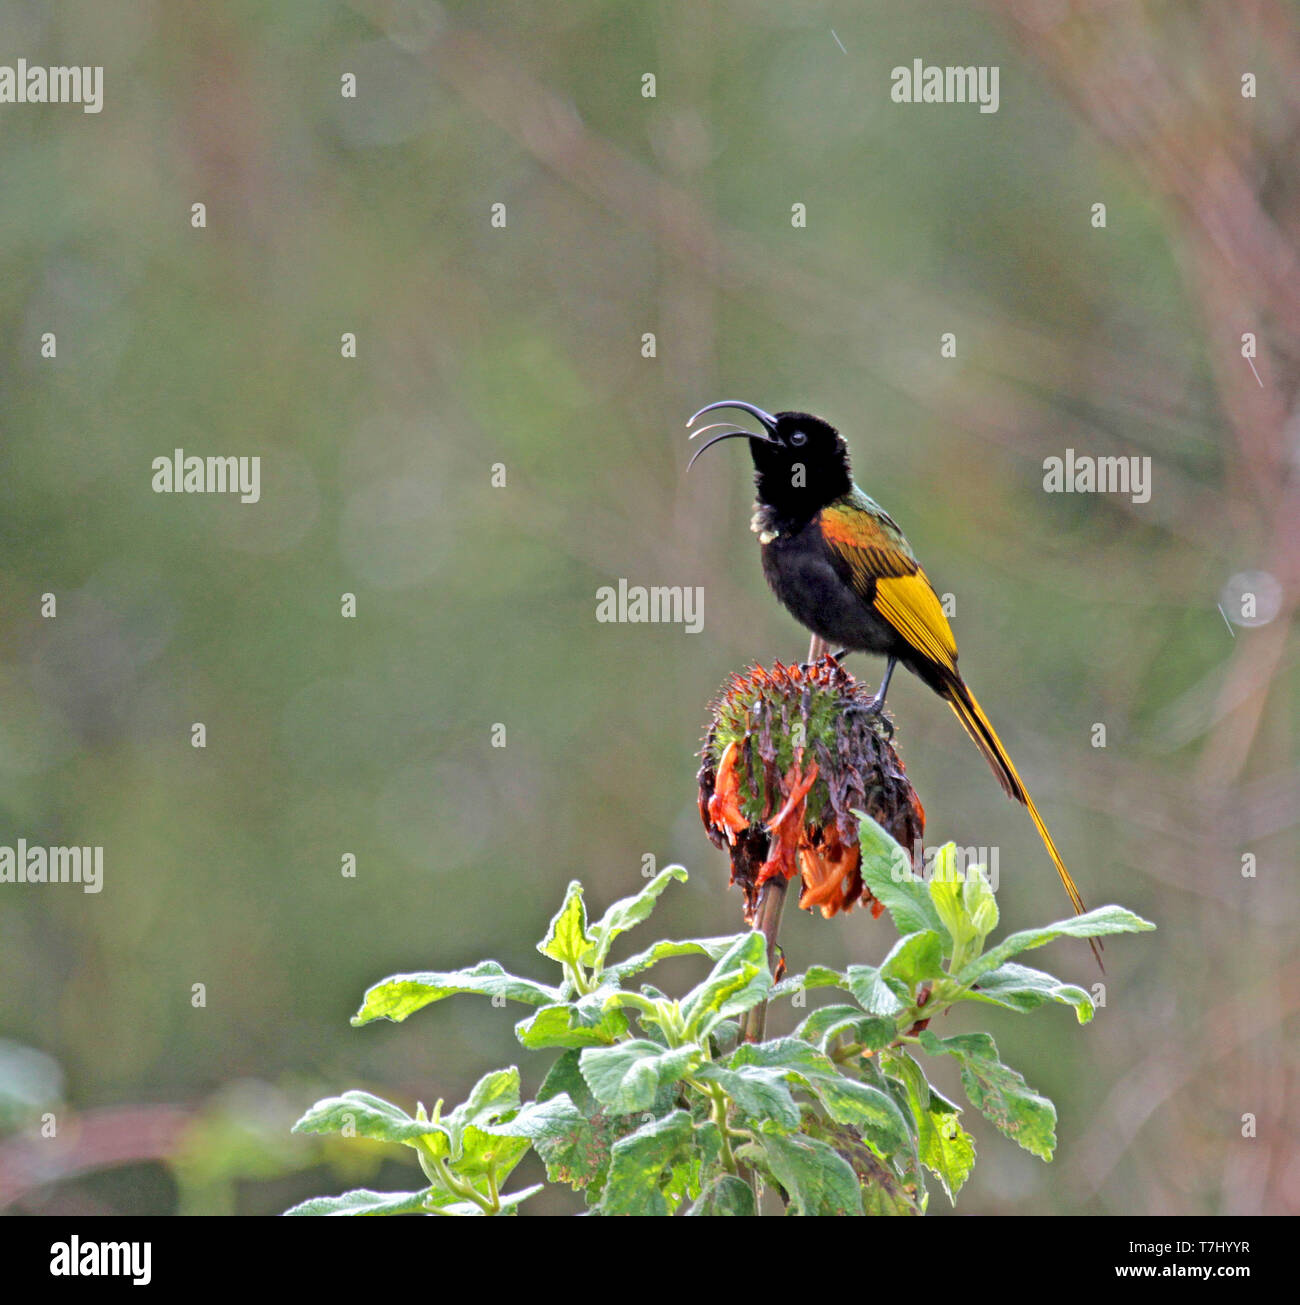 Golden-winged sunbird (Drepanorhynchus reichenowi) singing perched on a flower Stock Photo